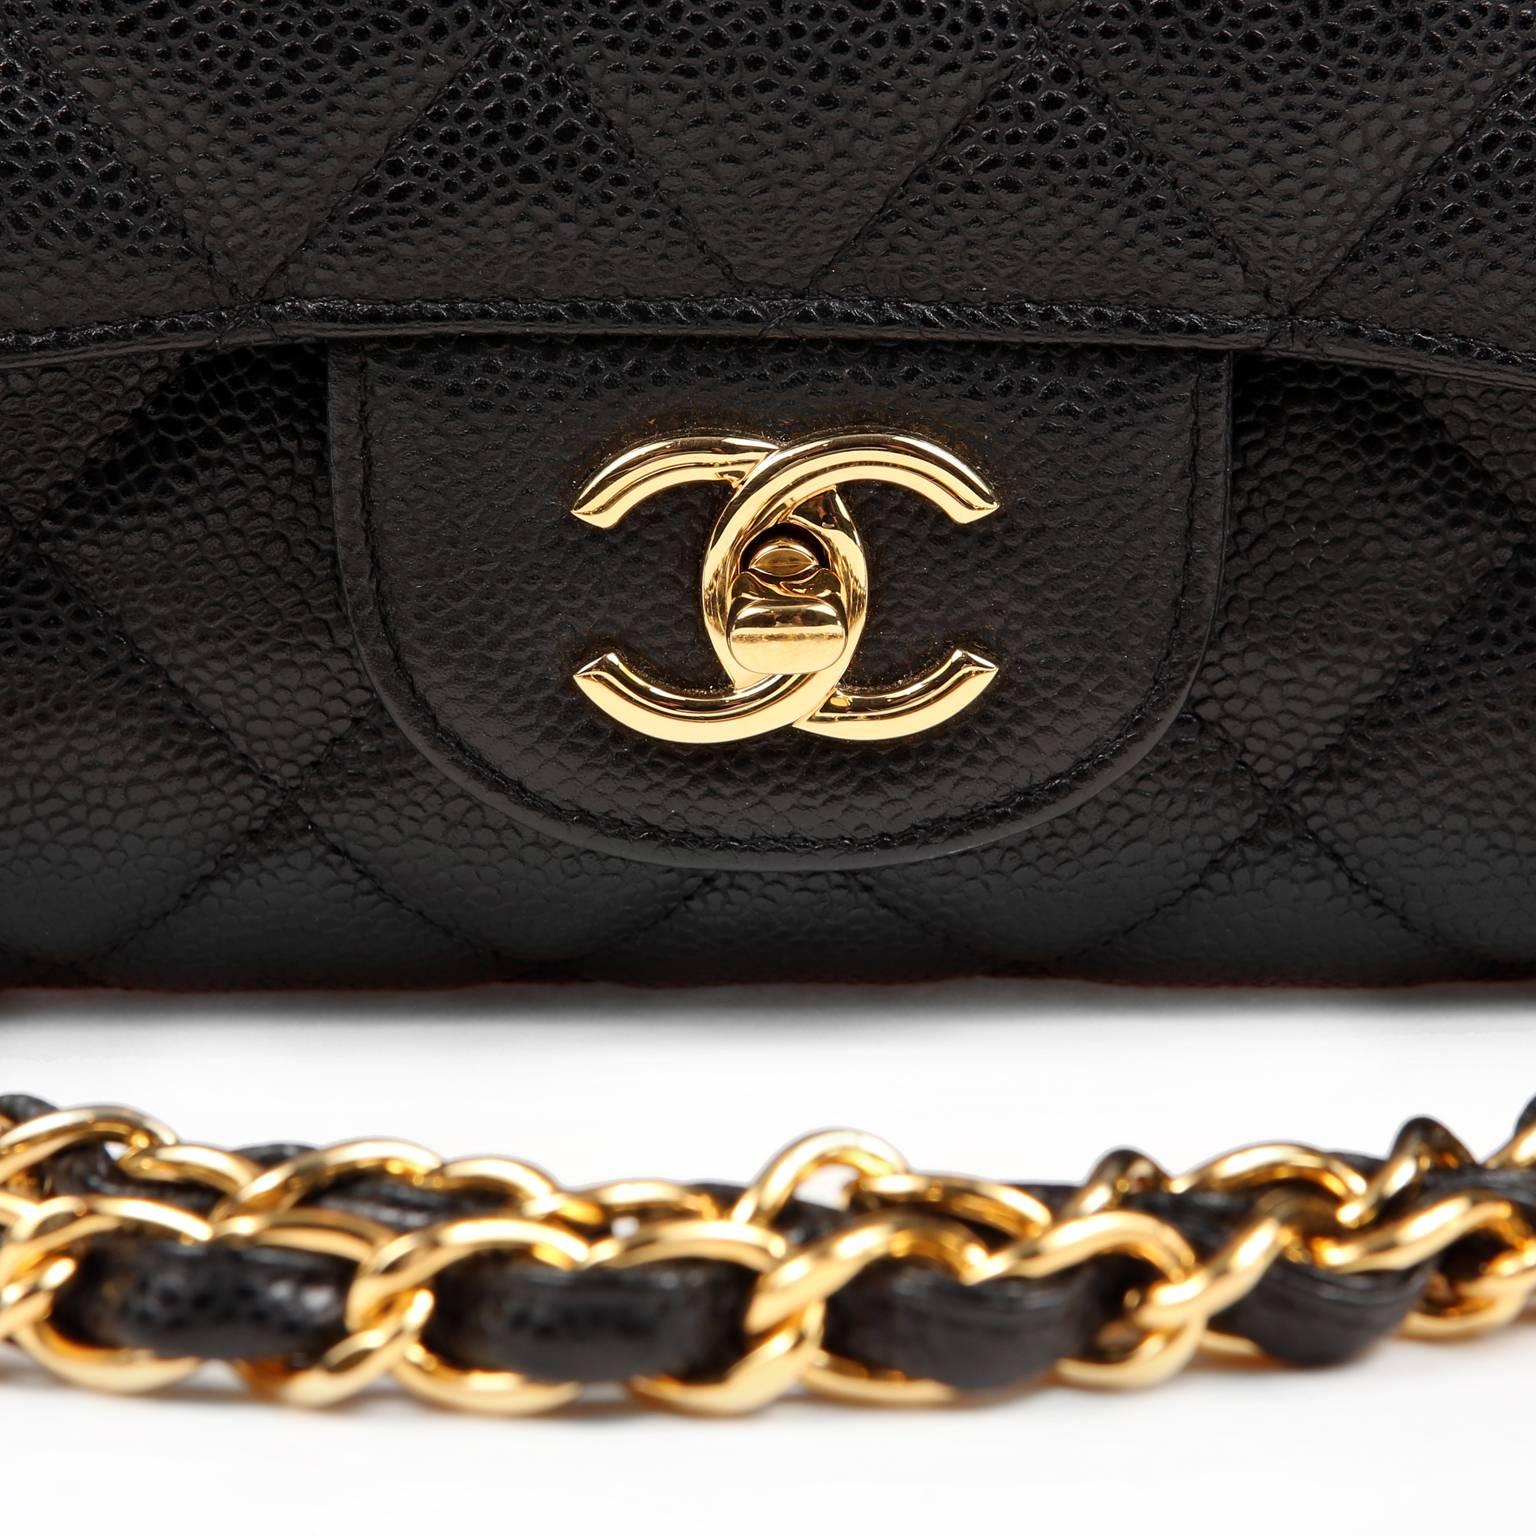 Chanel Black Caviar Maxi Flap with Gold Hardware 2